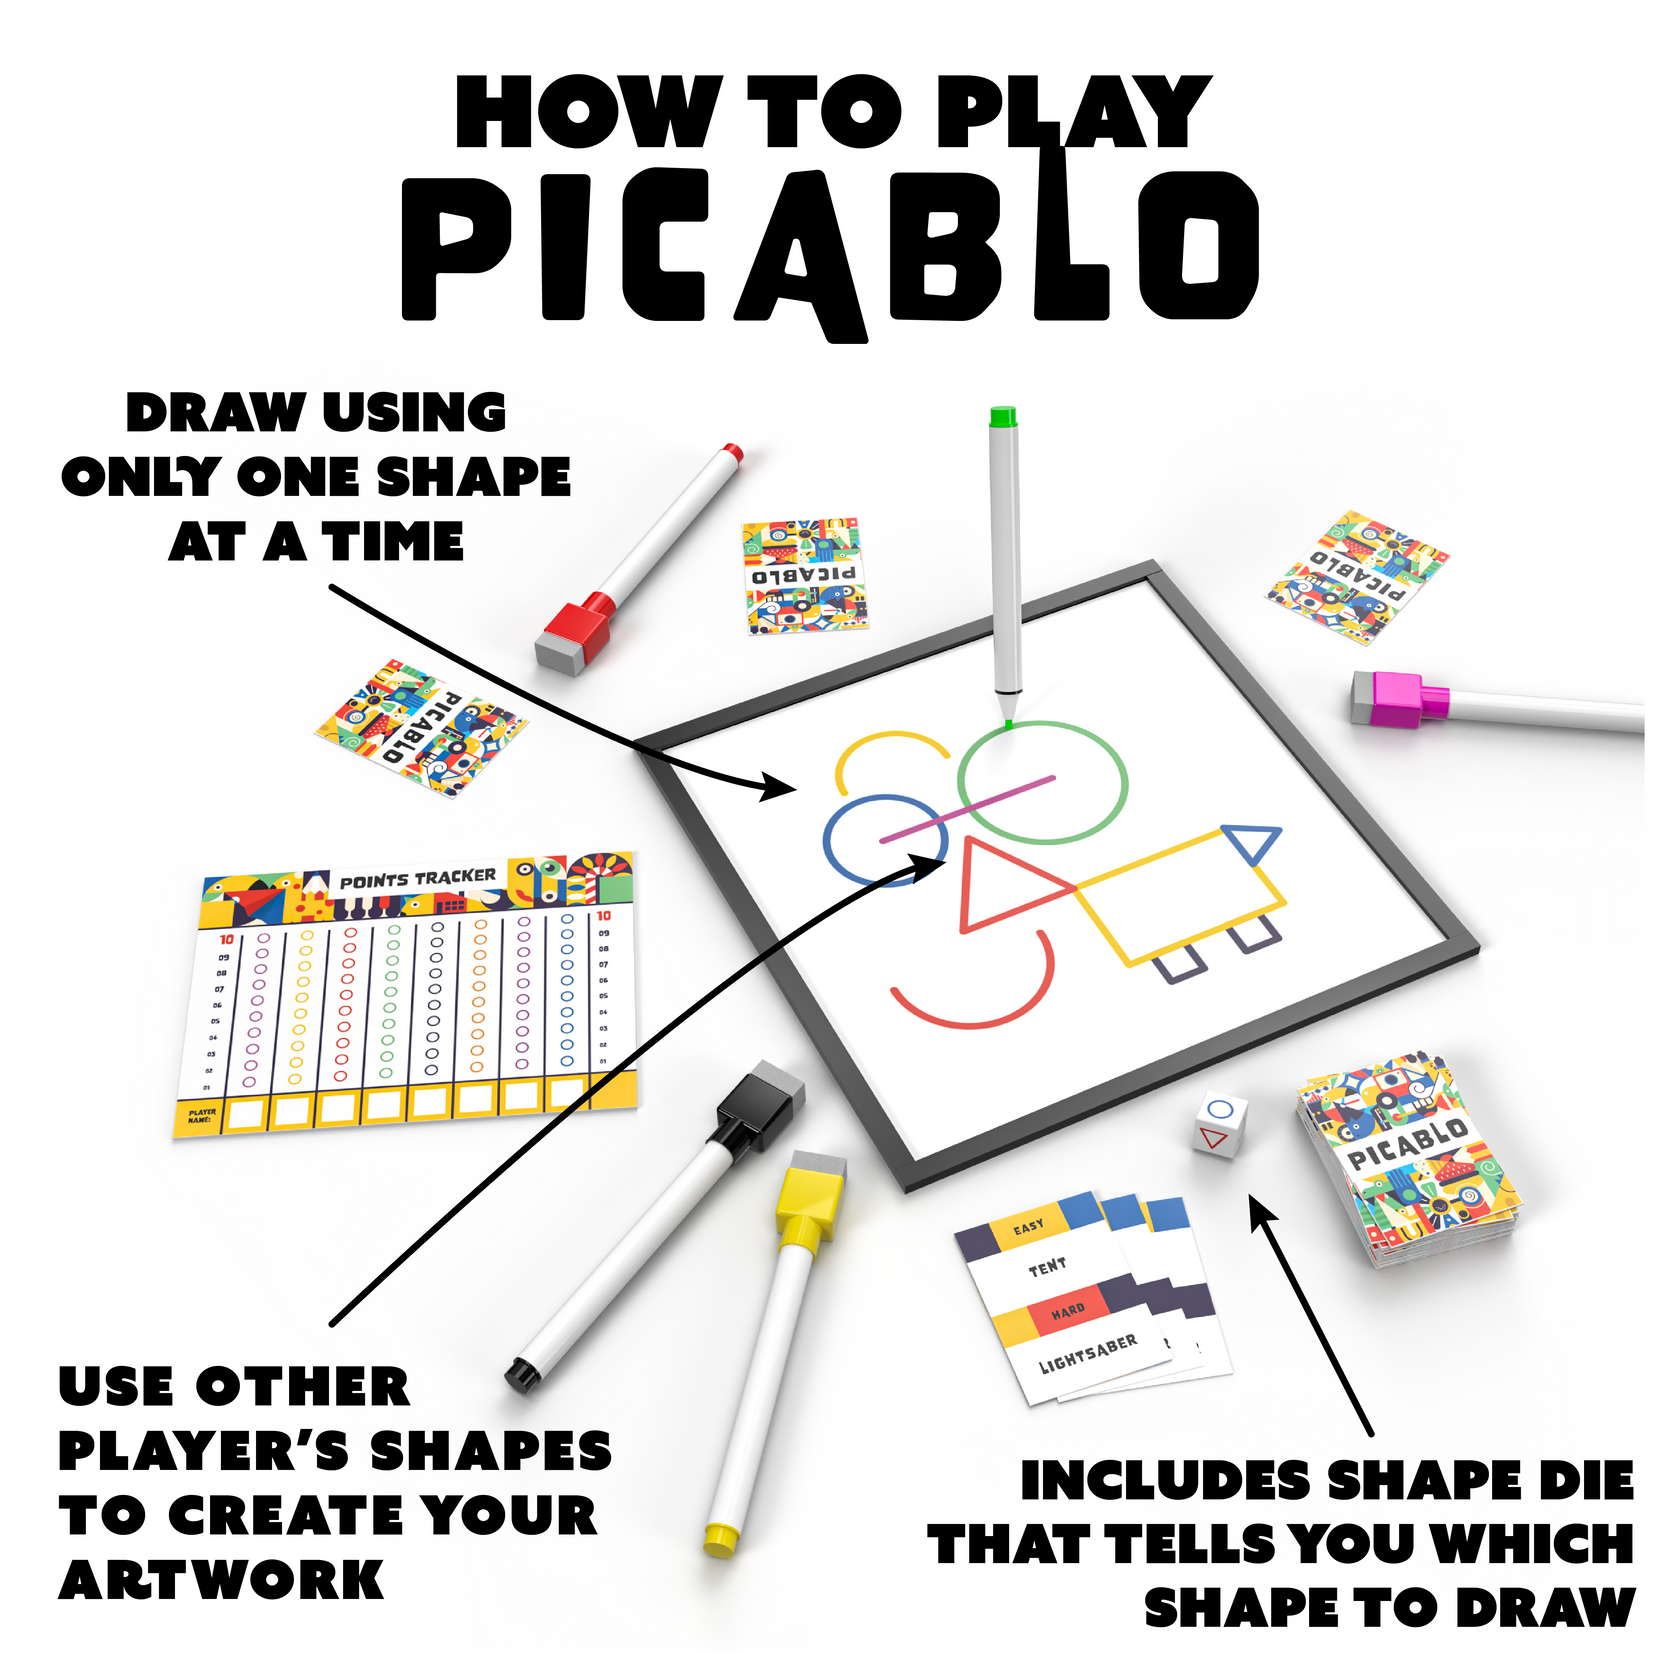 Picablo The ShapeDrawing Party Game Crated with Love